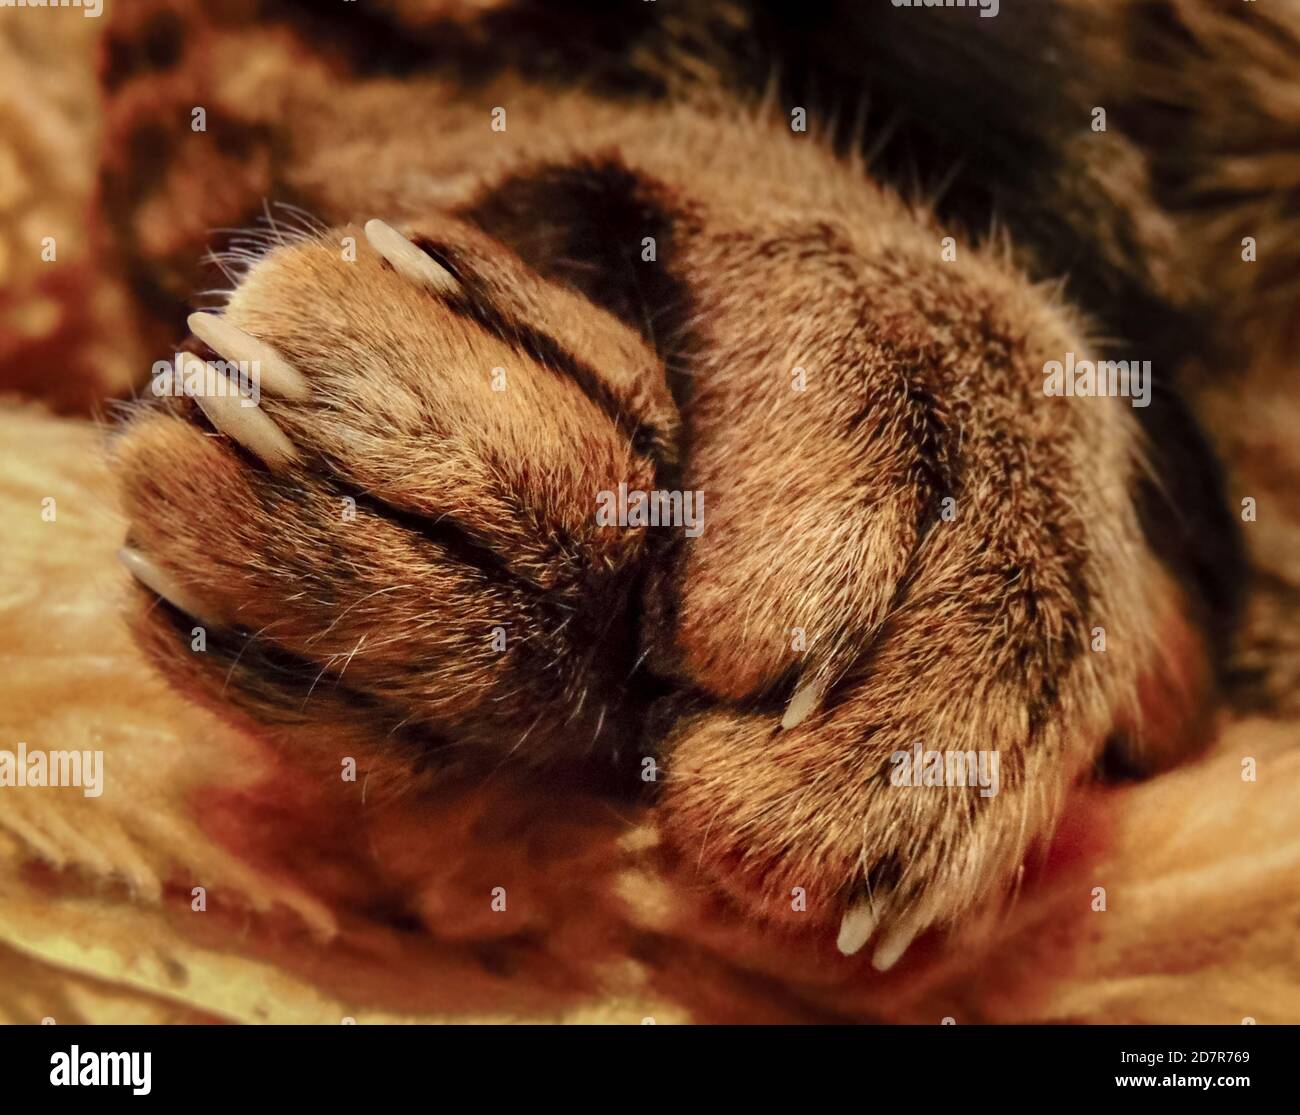 Large closeup image of Cat's paws with selective focus on the feline paws and blurred background Stock Photo